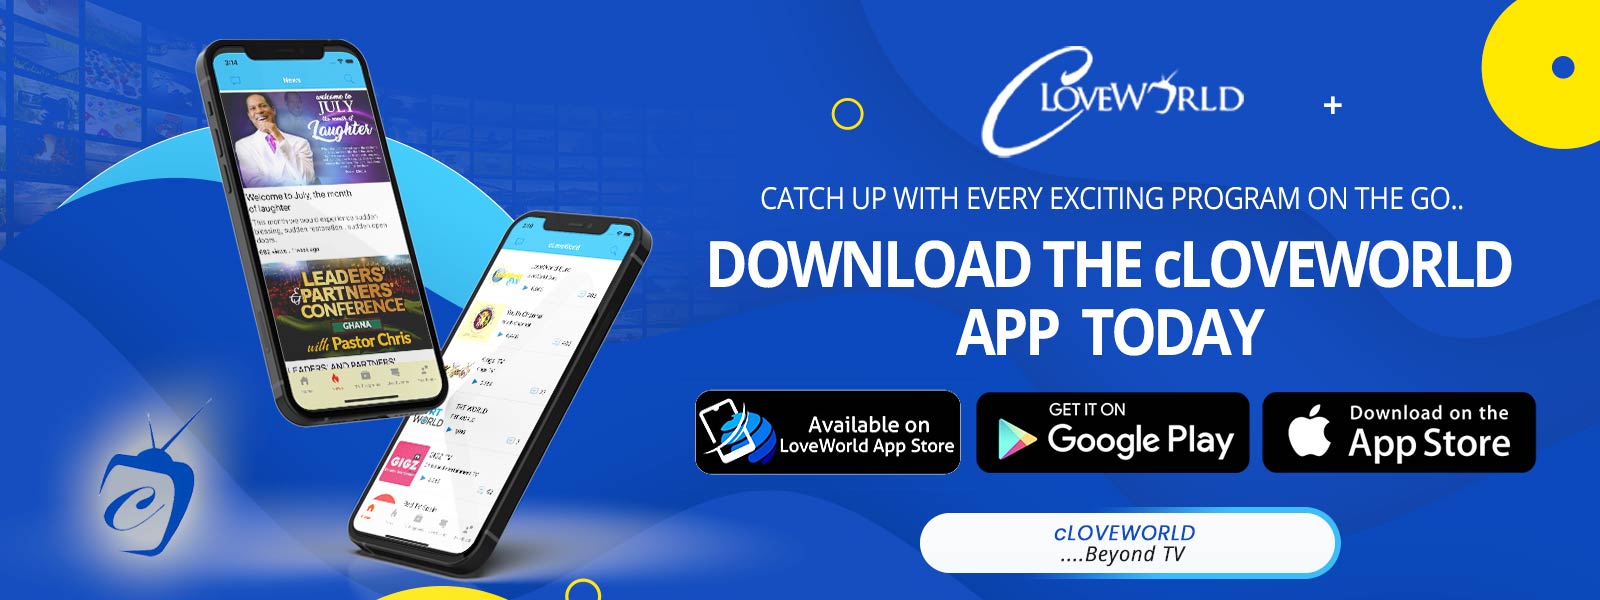 DOWNLOAD THE cLOVEWORLD APP